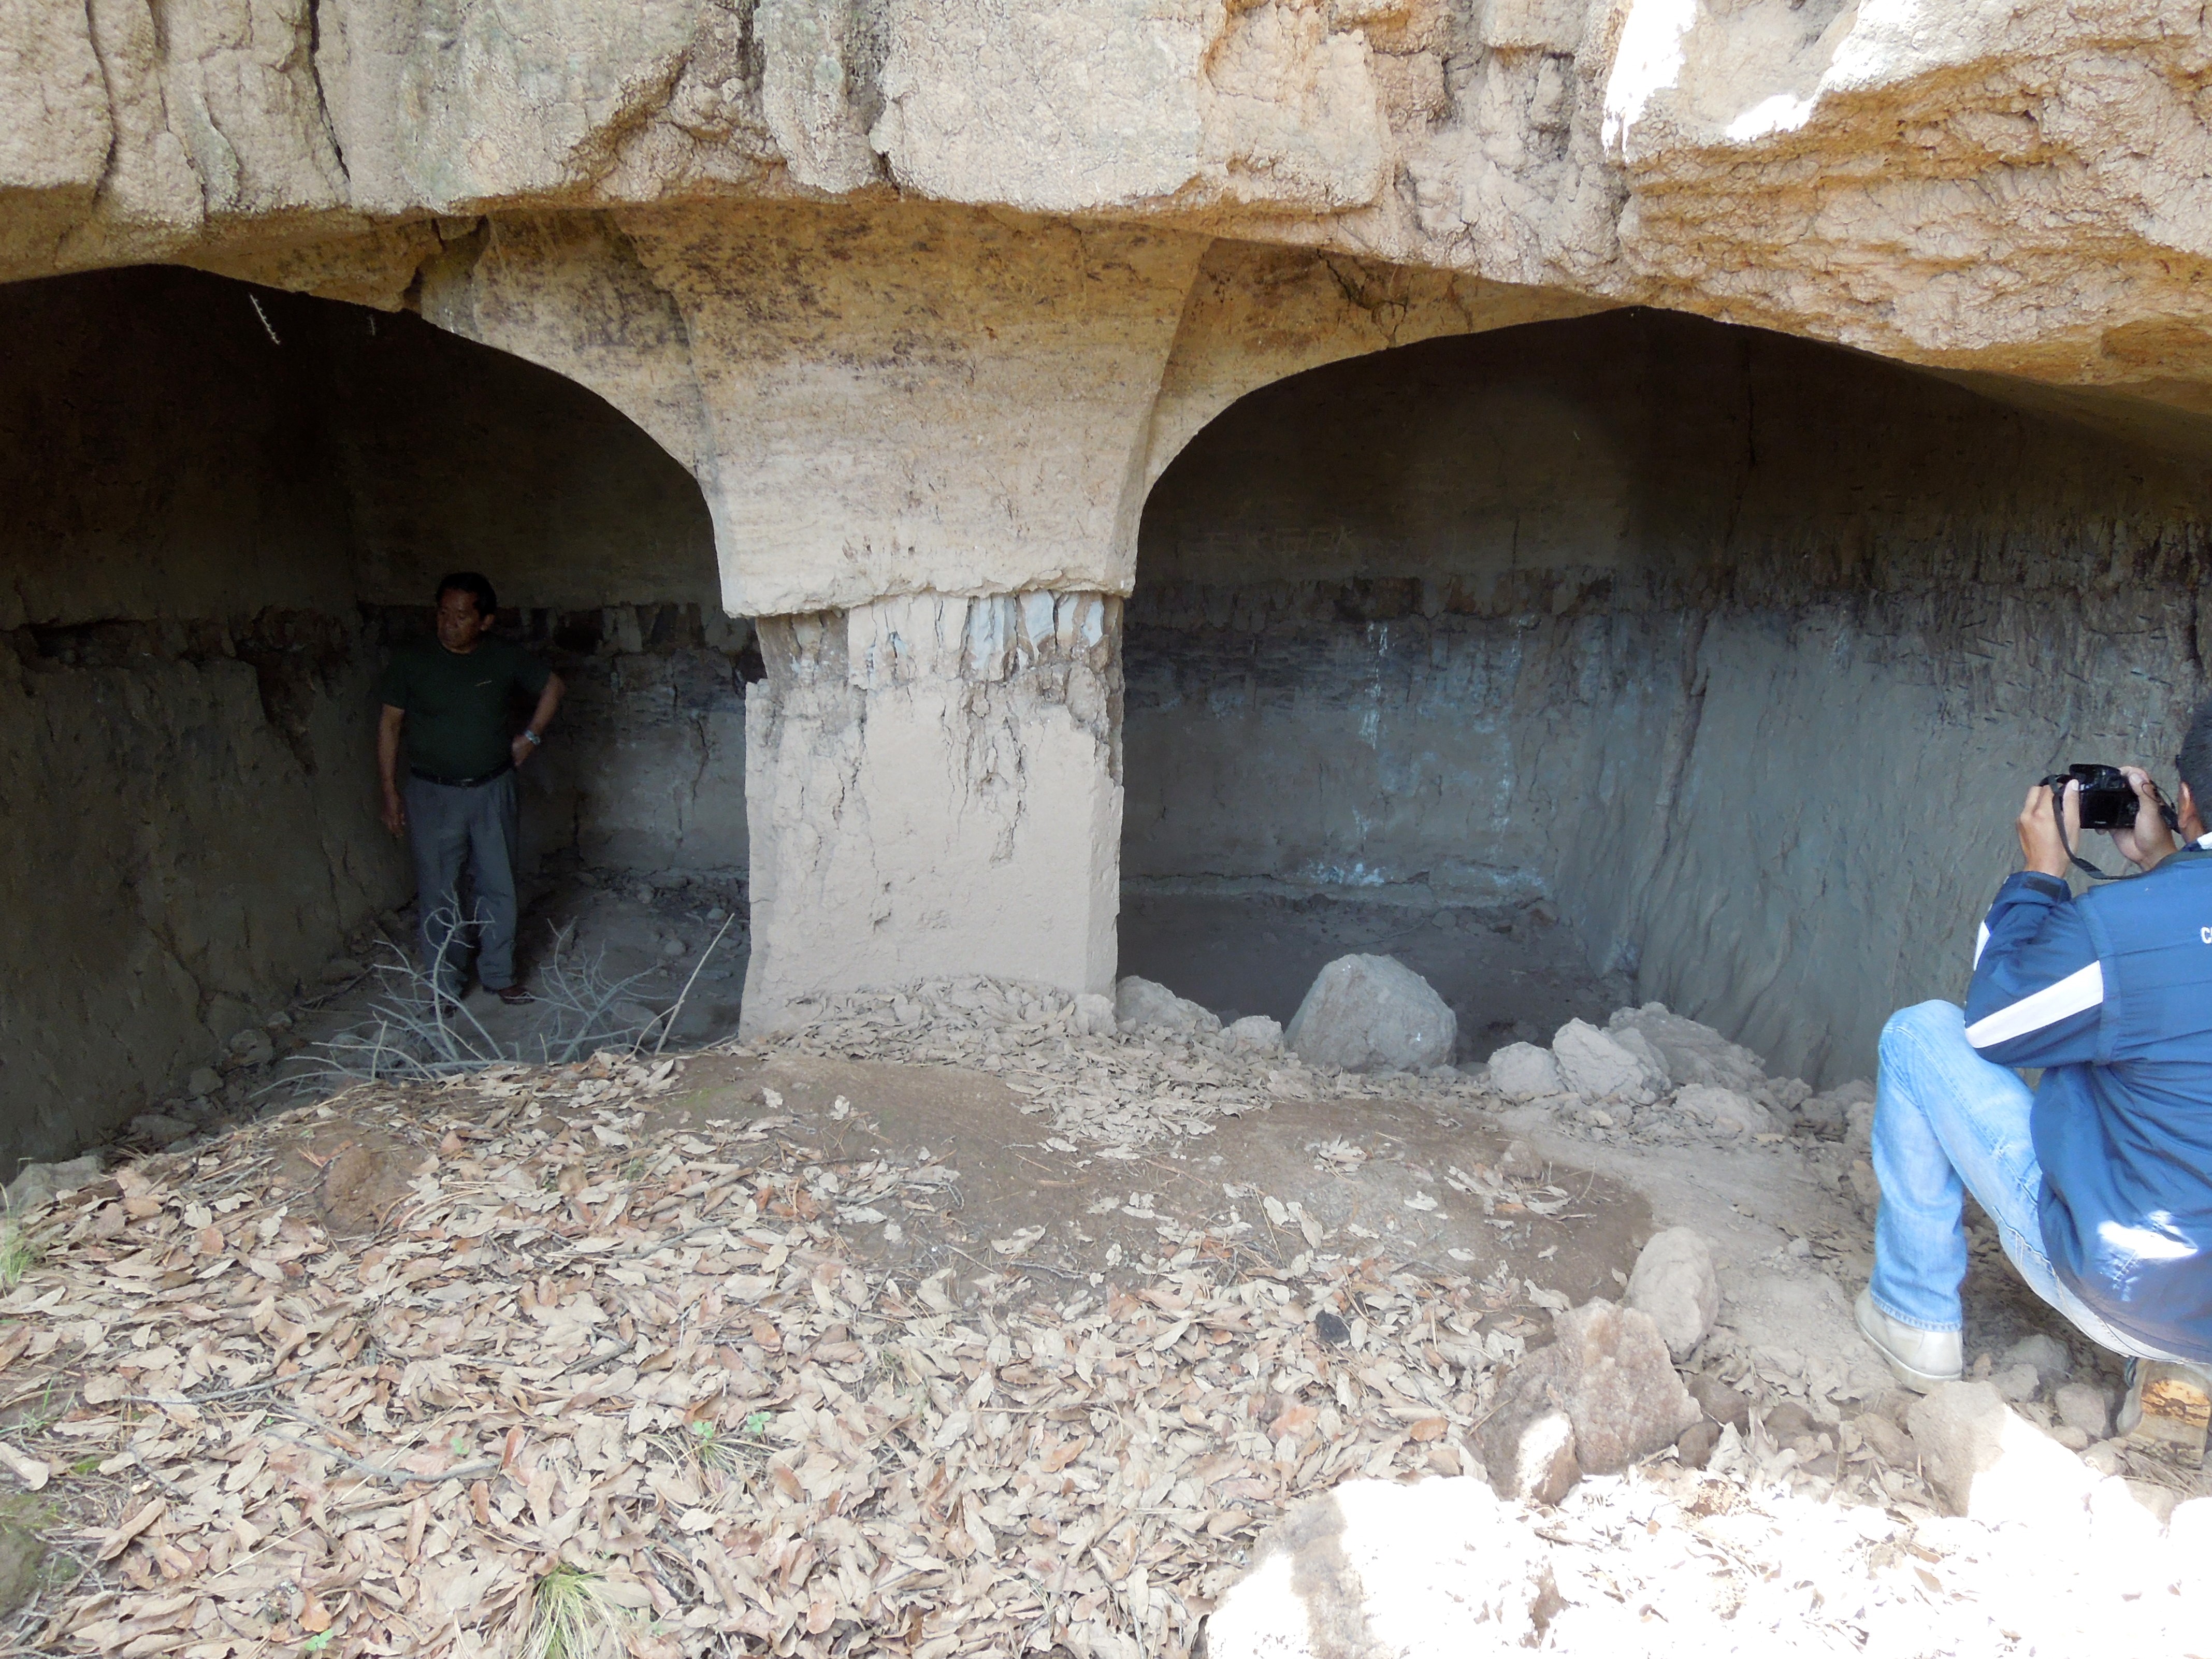 An underground shelter in Tlaxco, used for hiding people and valuables during the 1910 Mexican Revolution.